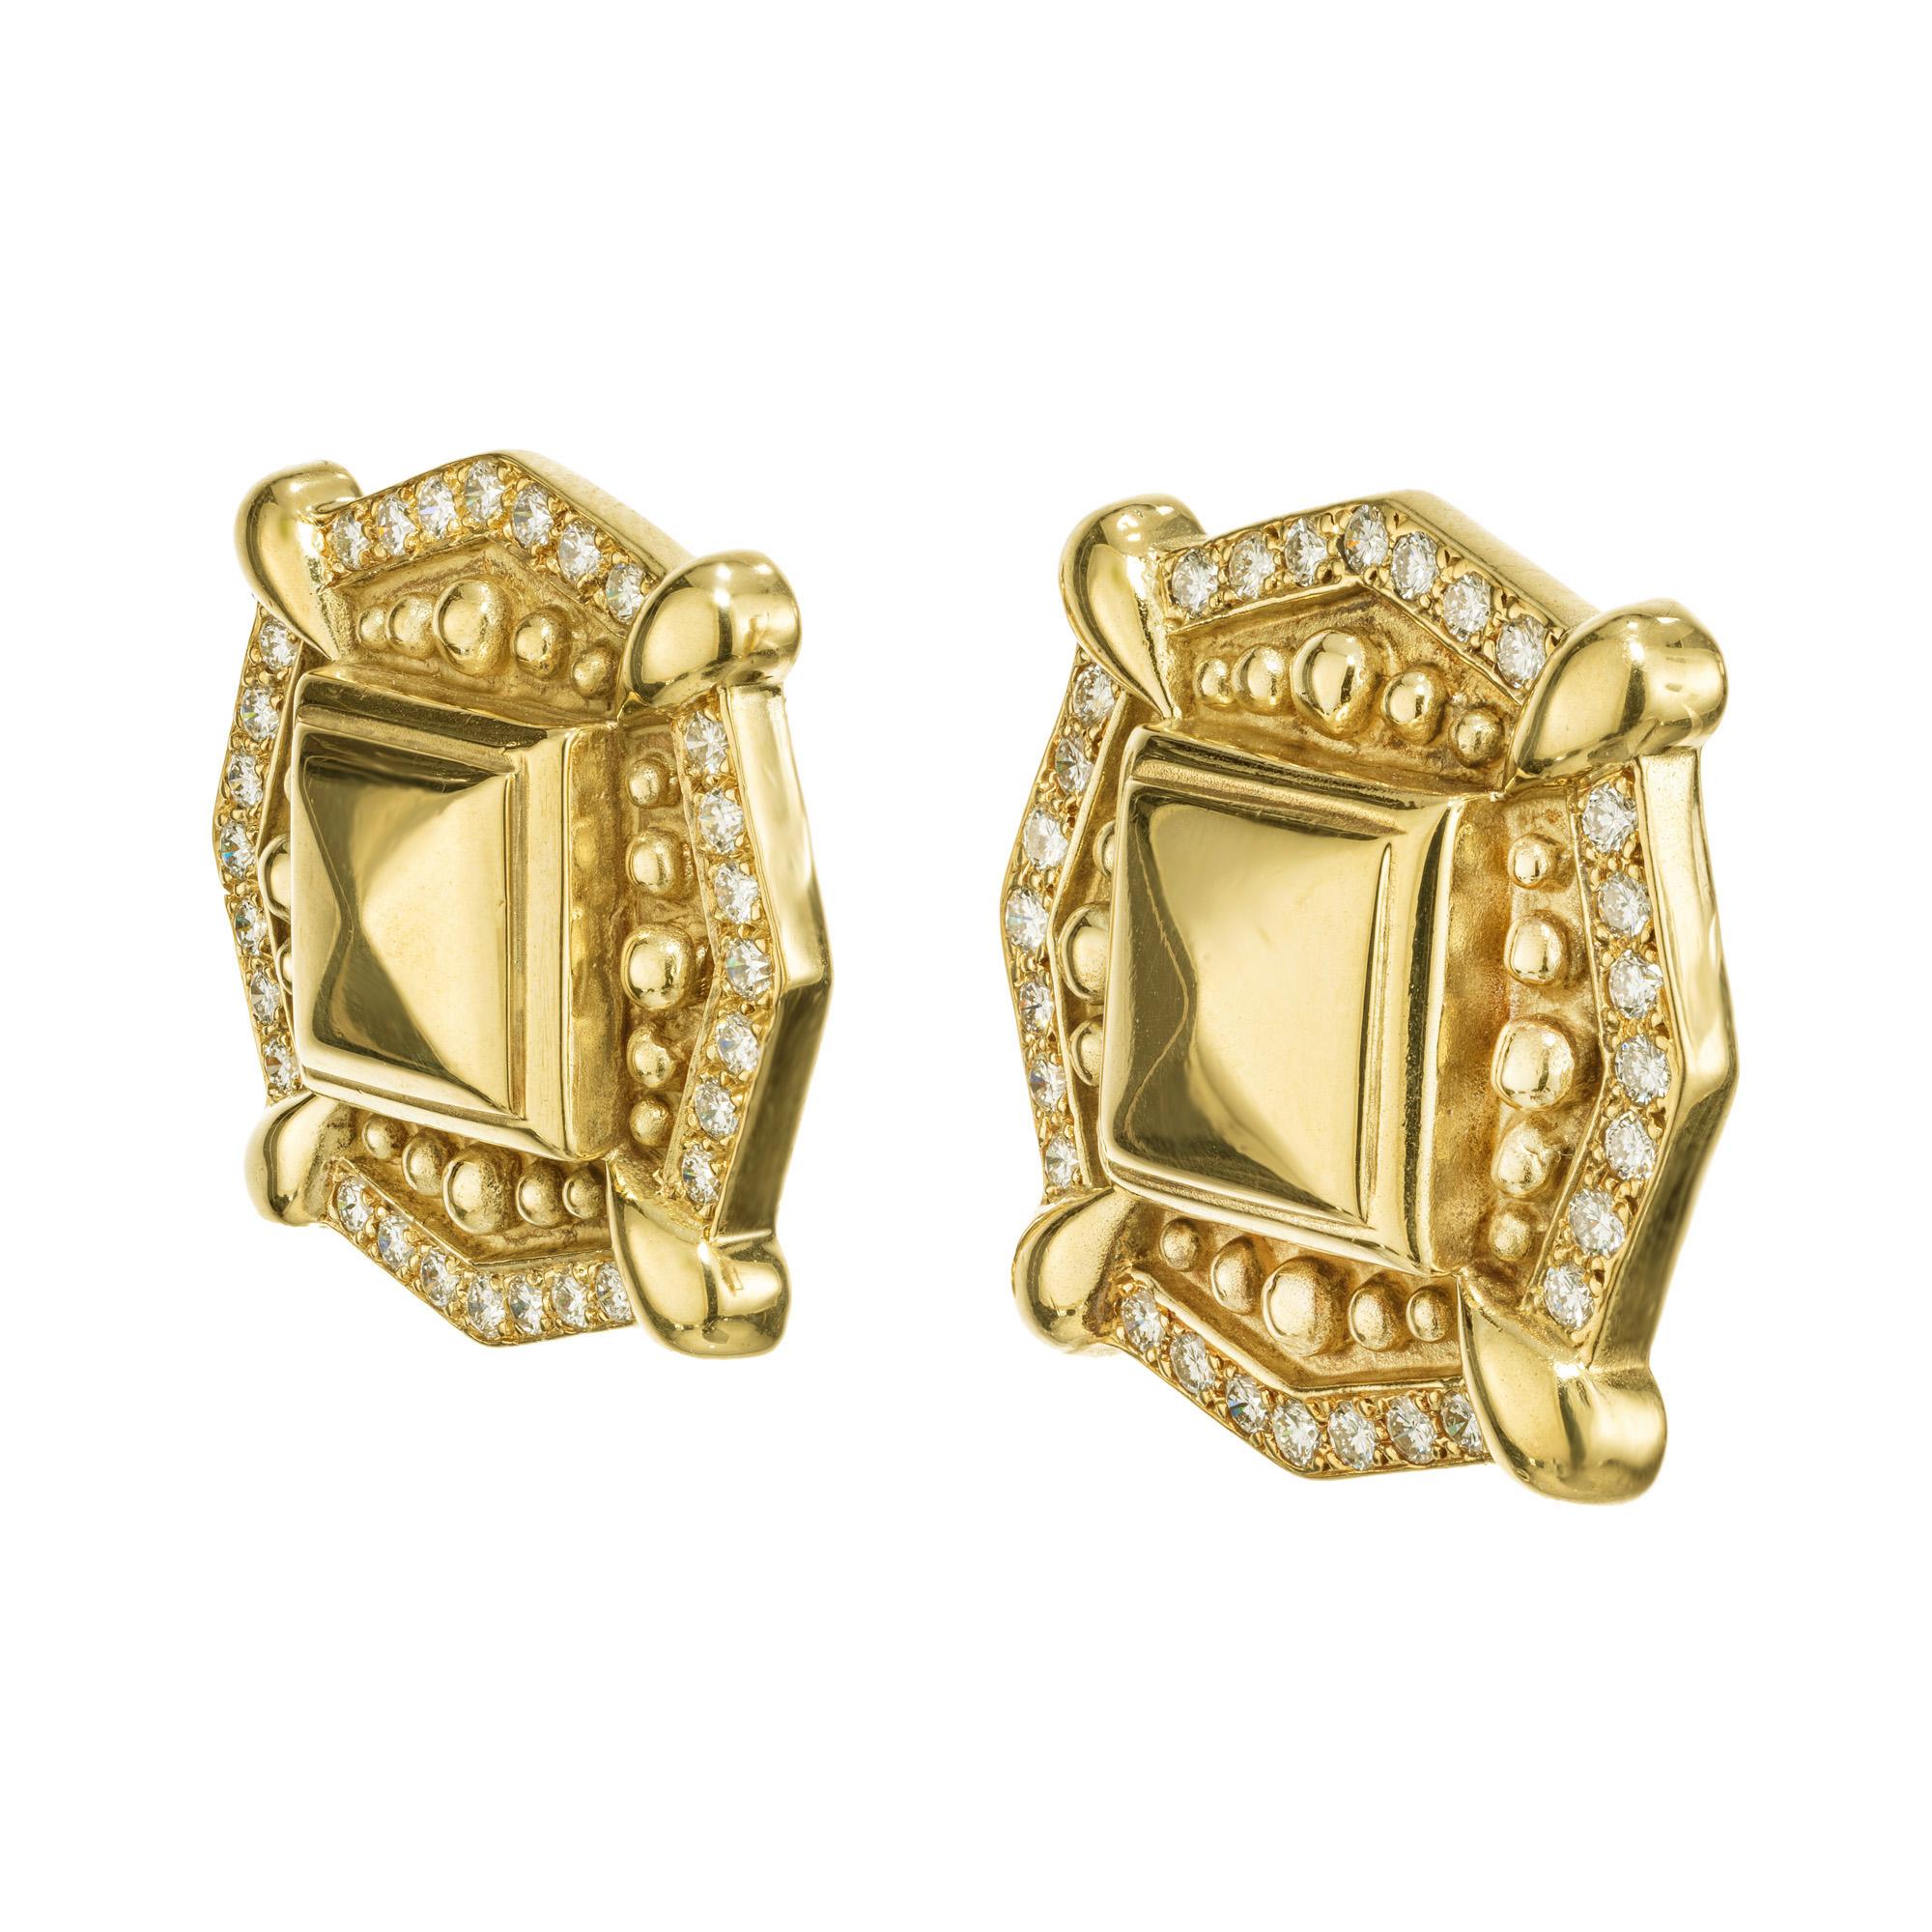 Mid-Century 1960's, Etruscan styled, European crafted textured Diamond lever back earrings in 18k yellow gold. Texted and detailed, these octagon clip post earrings are adorned with a halo of round cut diamonds, 56 diamonds with a total of 2.52cts.